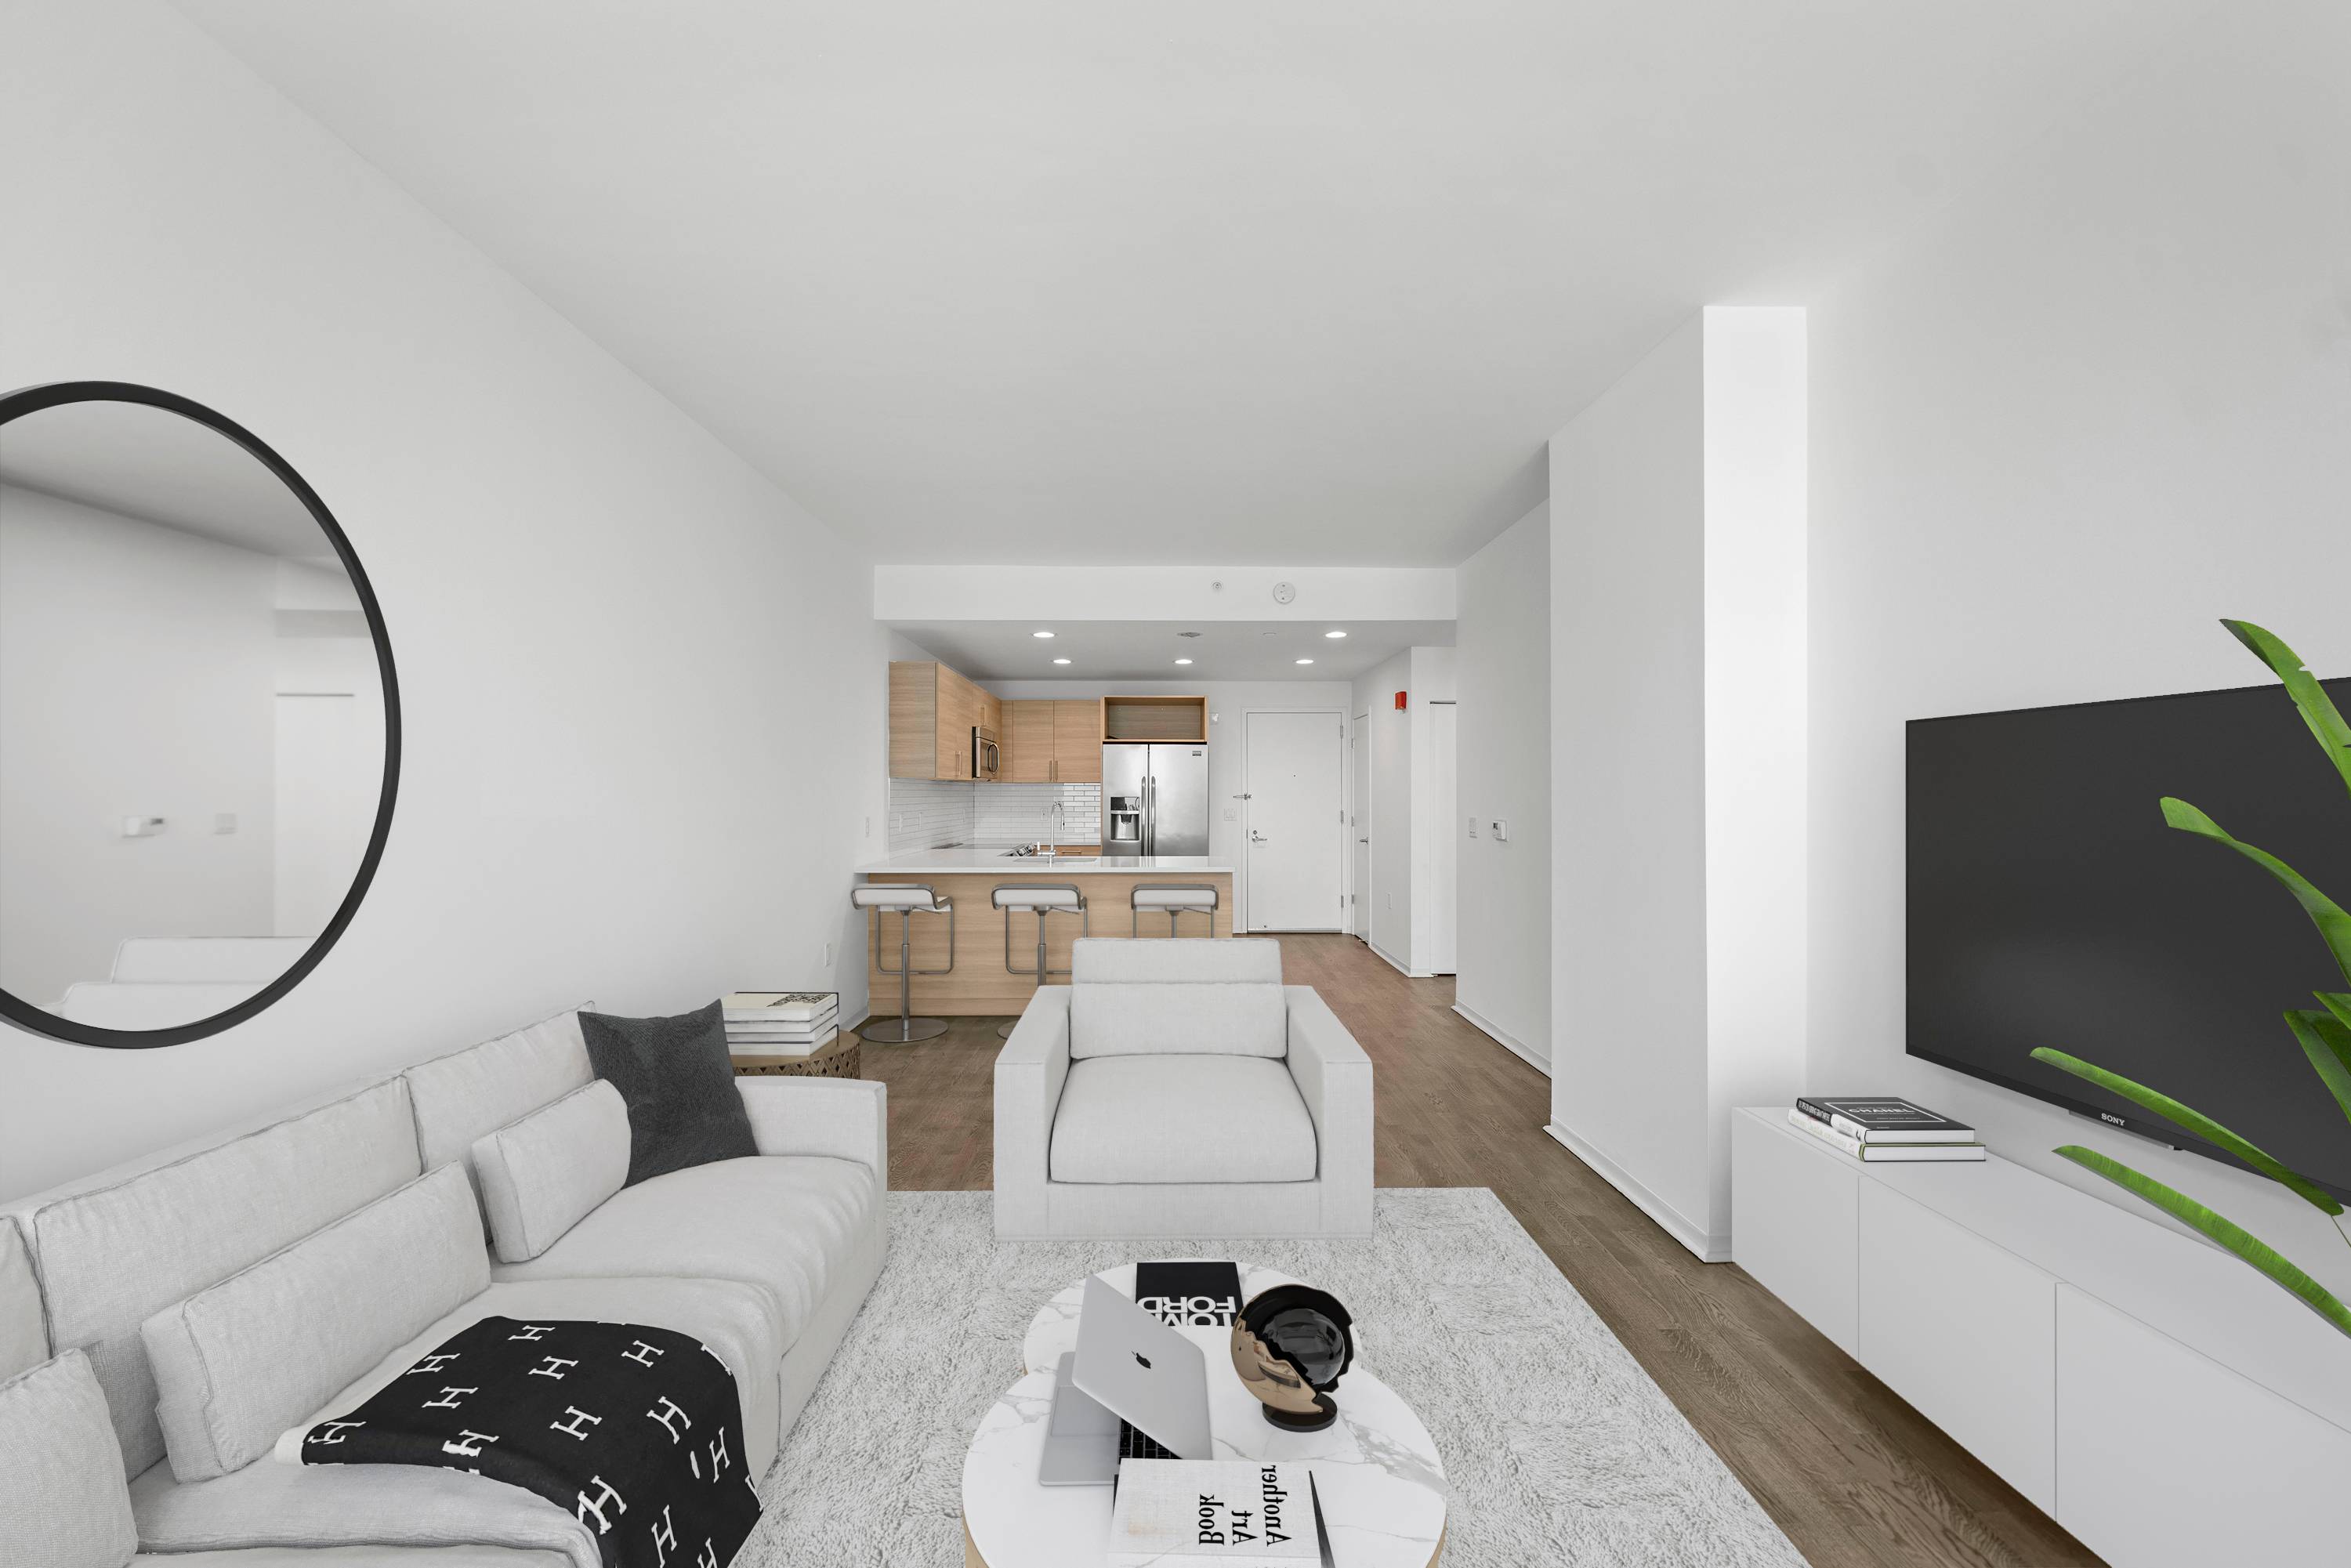 Residence 633 Now Available at Hudson Lights!  West Facing 1BR / 1BA Apartment.  West Facing Views.  Washer/Dryer In Unit!  Modern Finishes.  Building Shuttle to New York City.